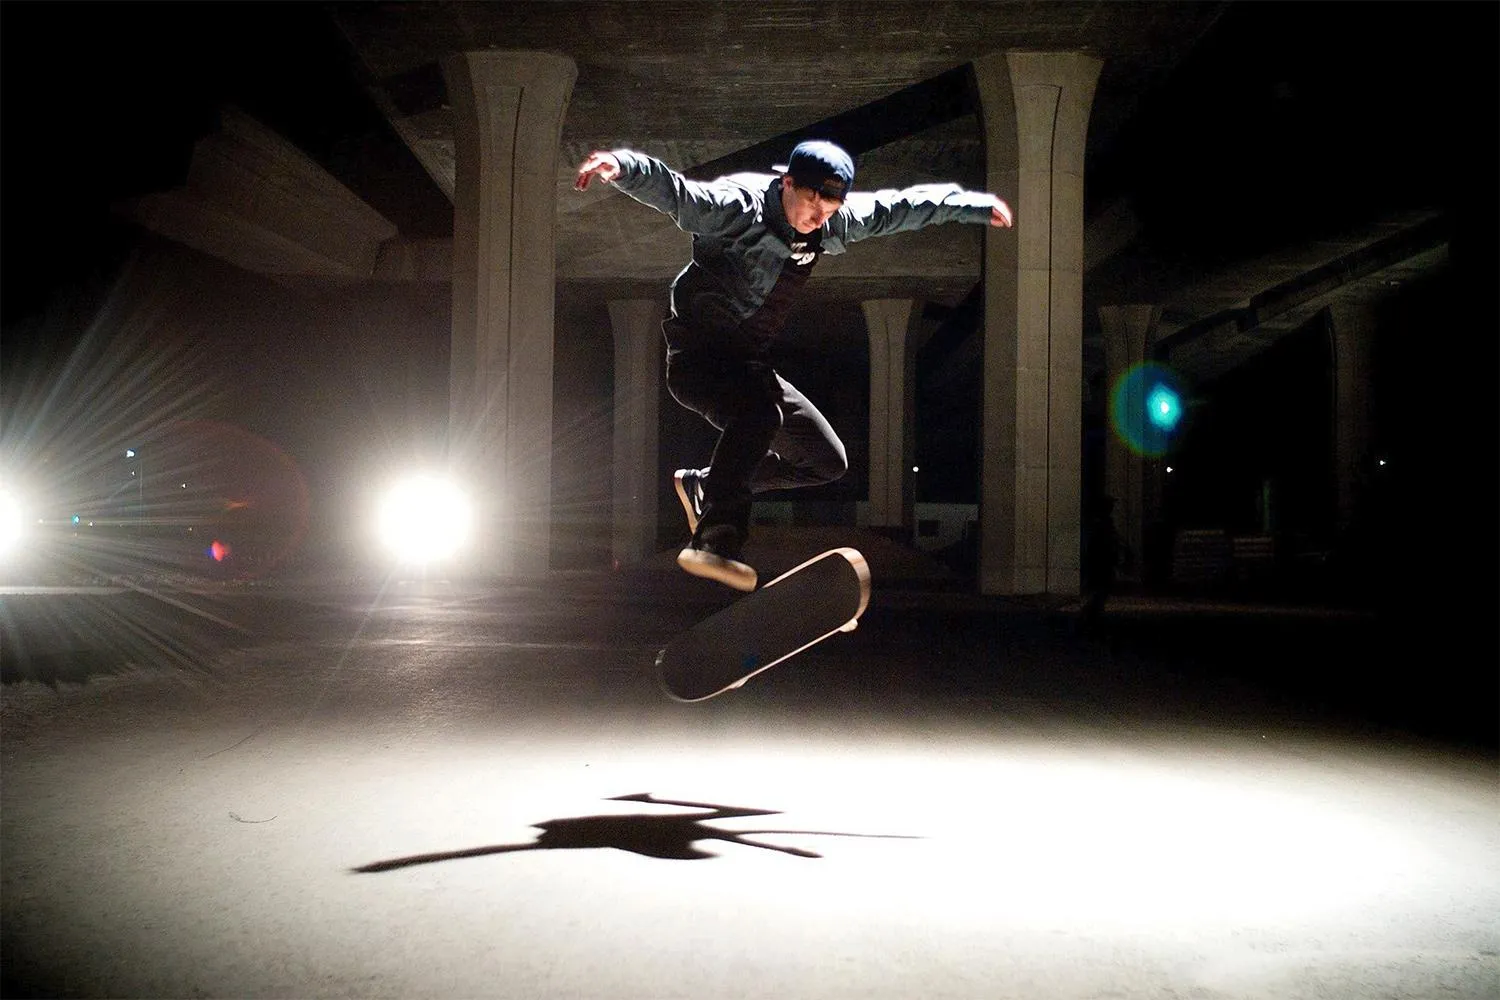 New Nike SB skateboarding app features tilt-to-view video, games ...